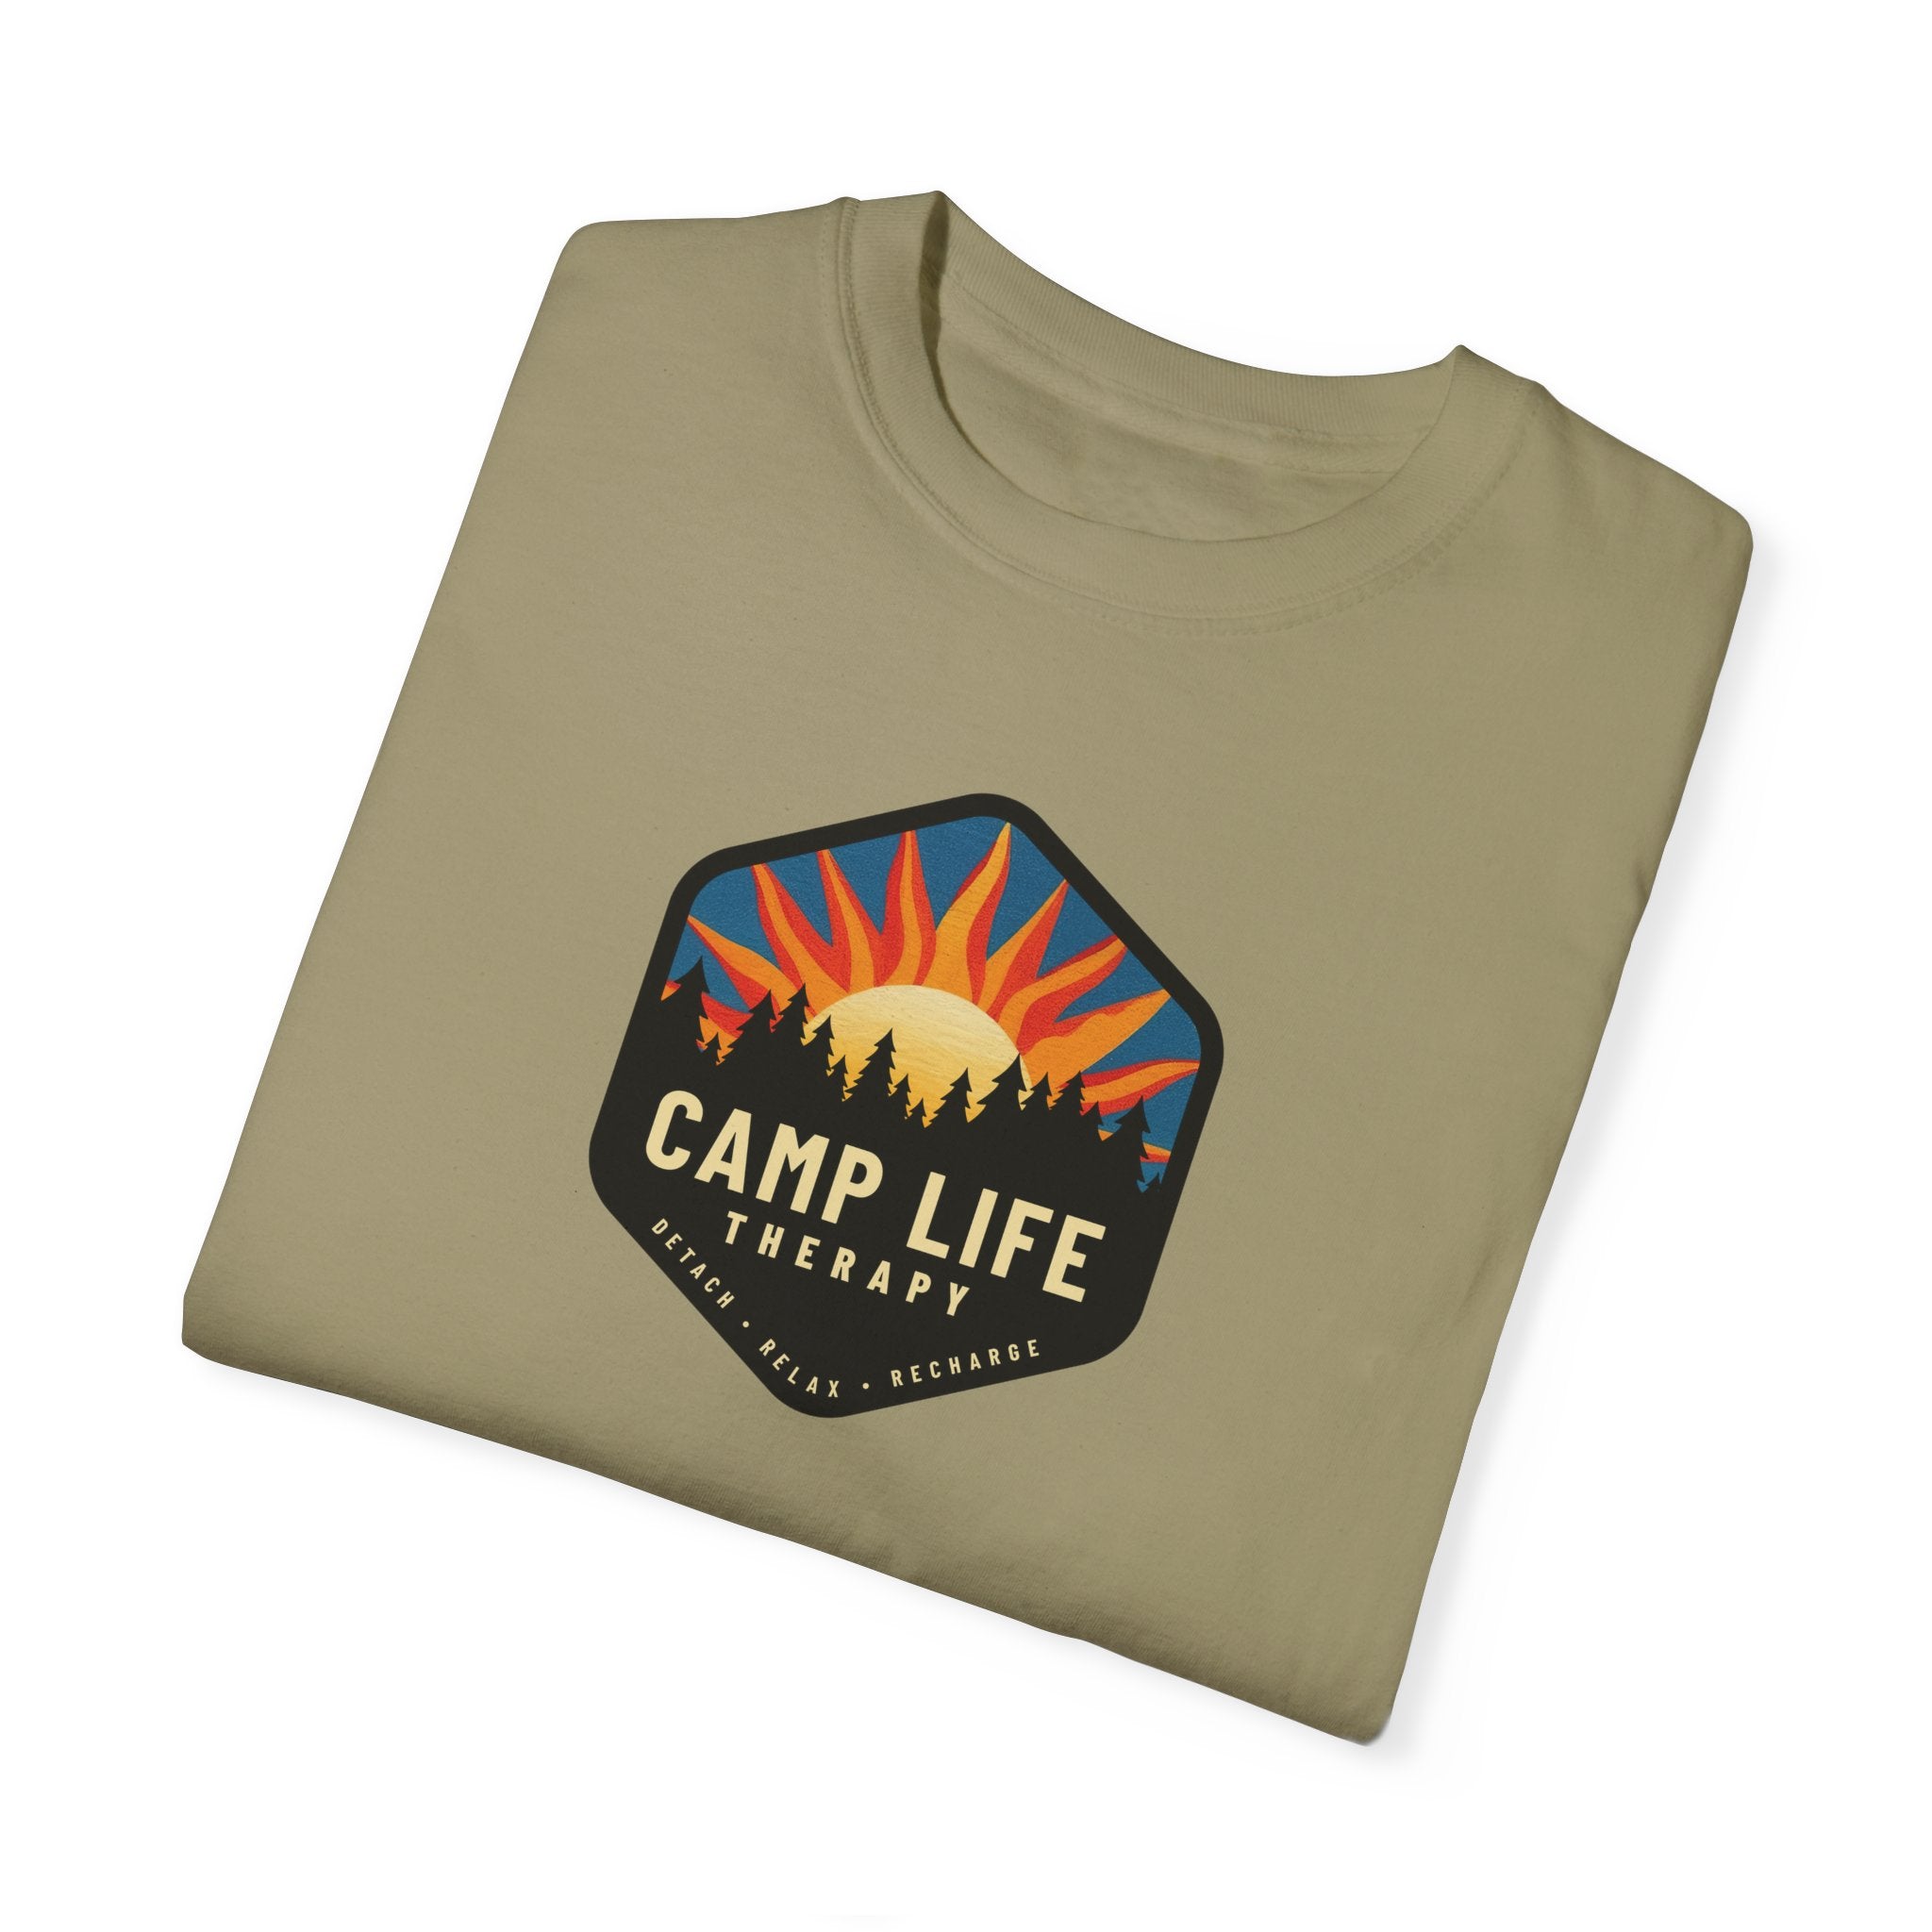 Morning Rays - T-Shirt (Vintage Look Comfort Colors)